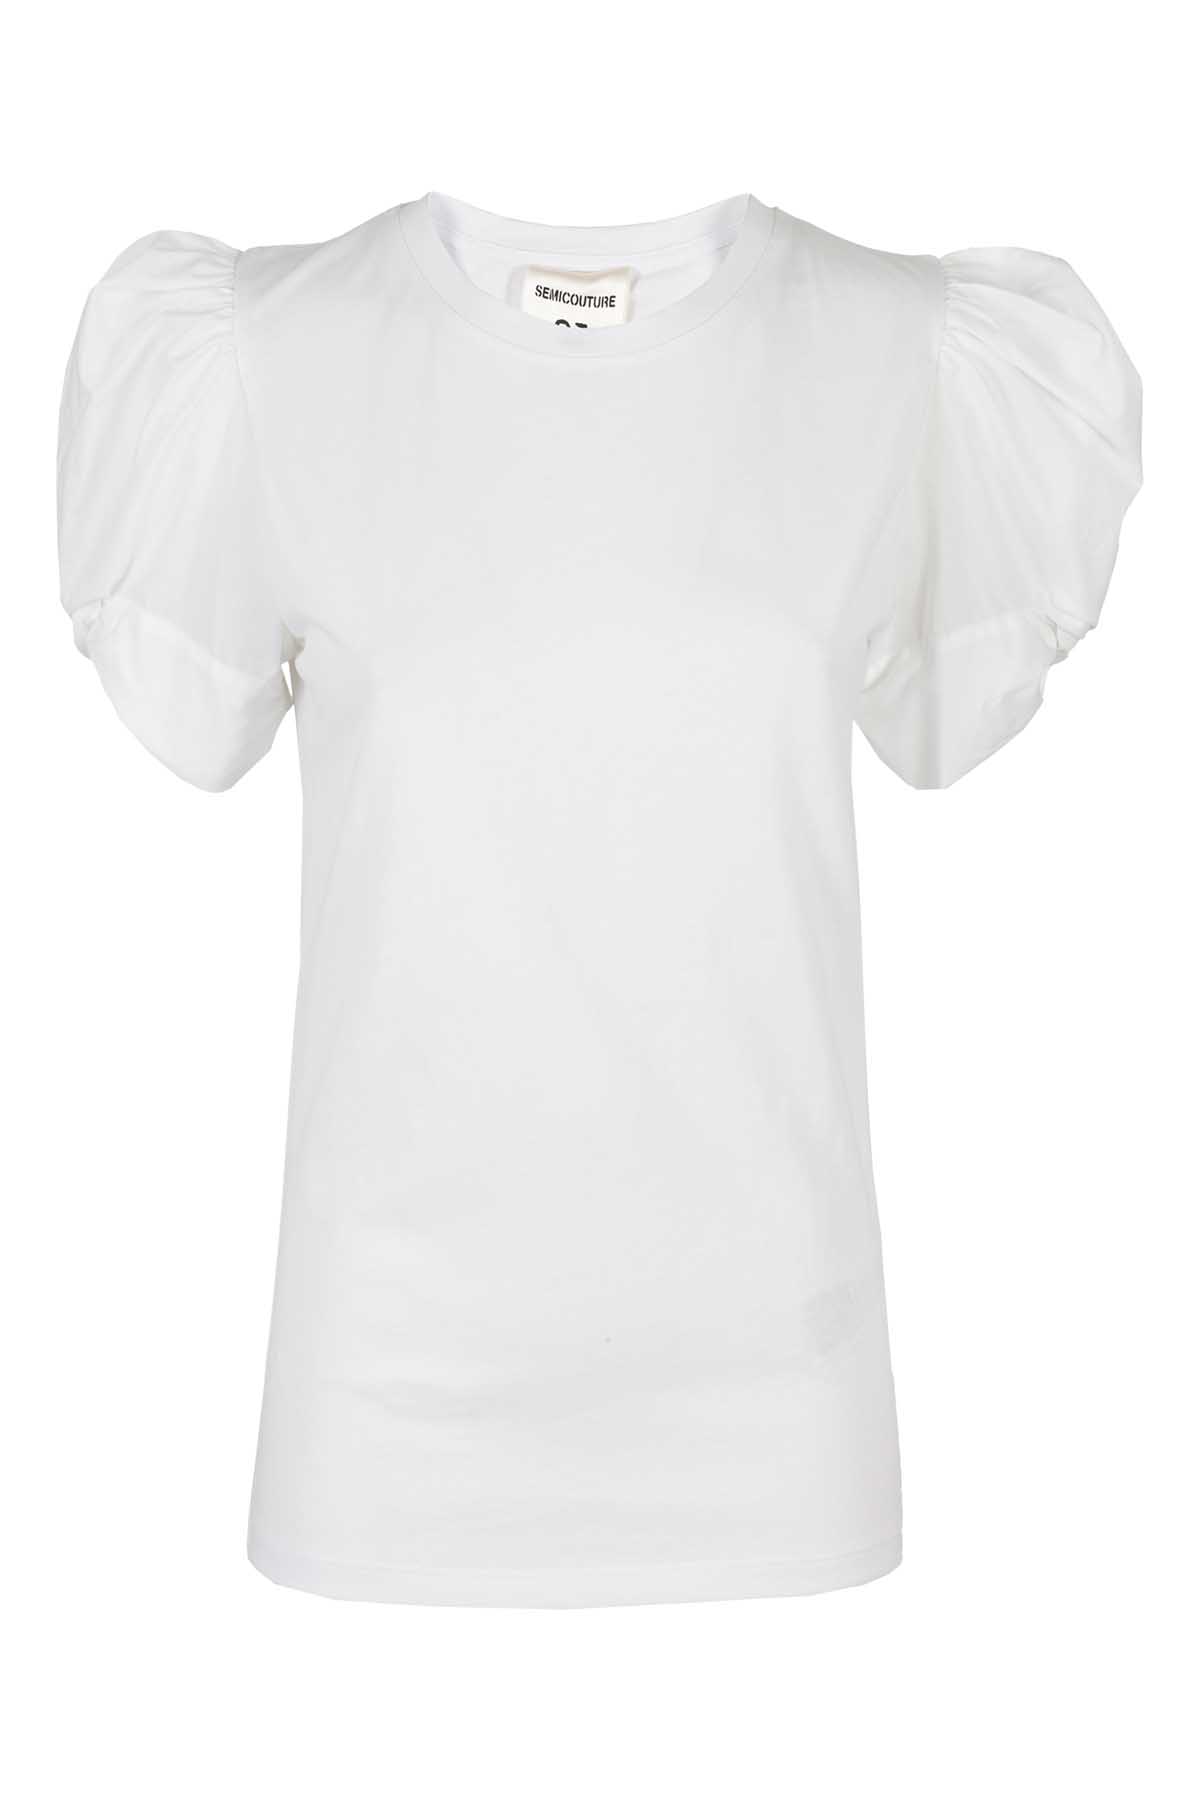 SEMICOUTURE T-SHIRT,Y1SK10 A01 BIANCO